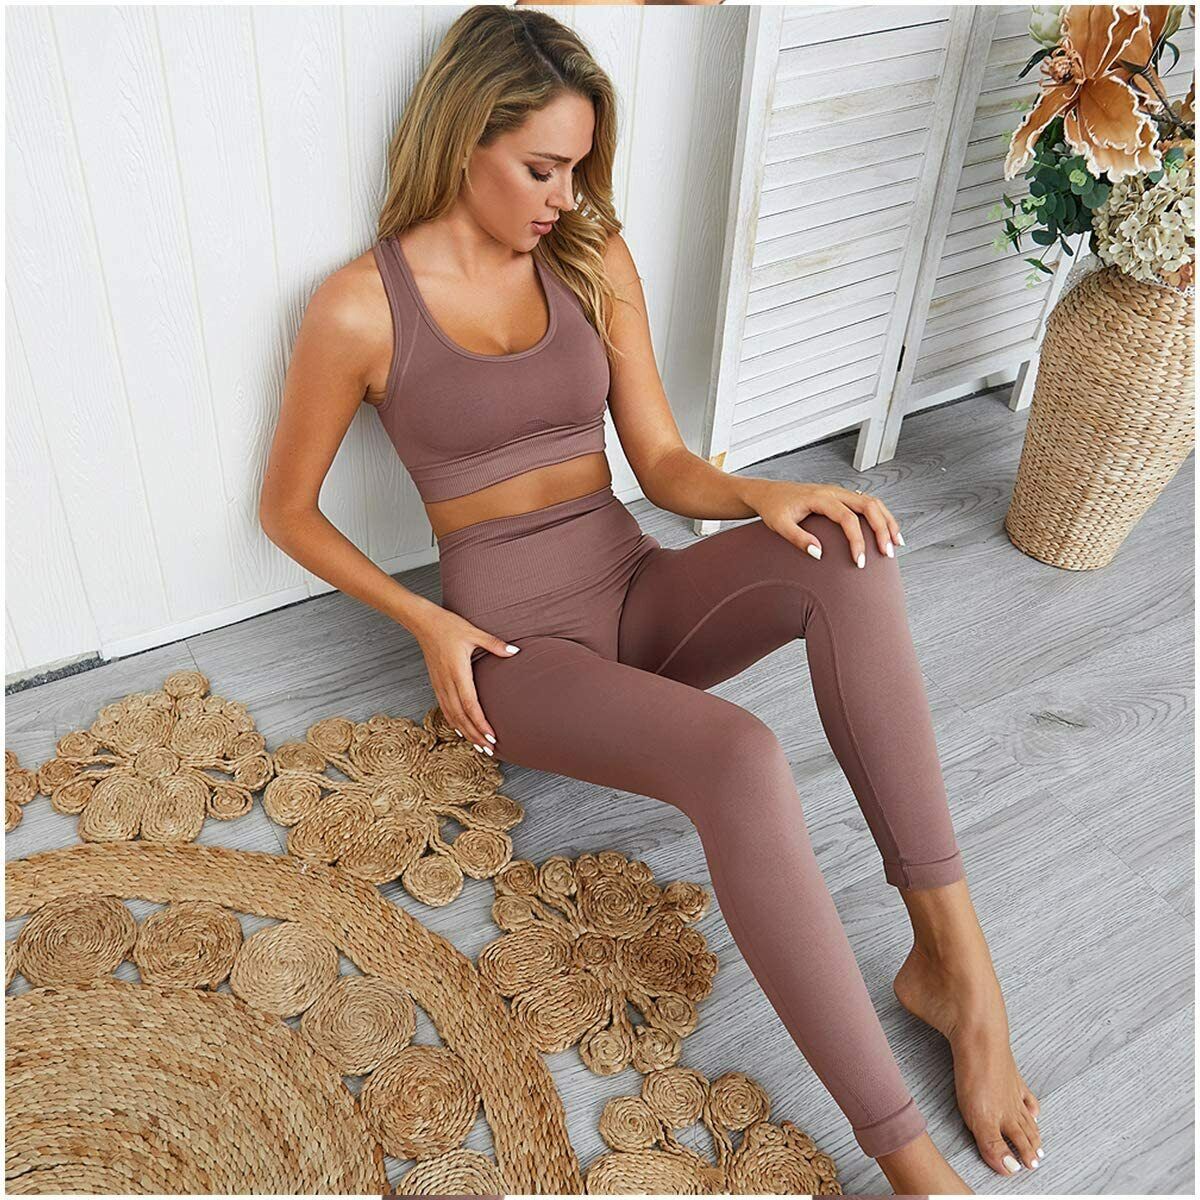 bbmee Yoga Outfits for Women 2 Piece Set,Workout High Waist Athletic  Seamless Le | eBay